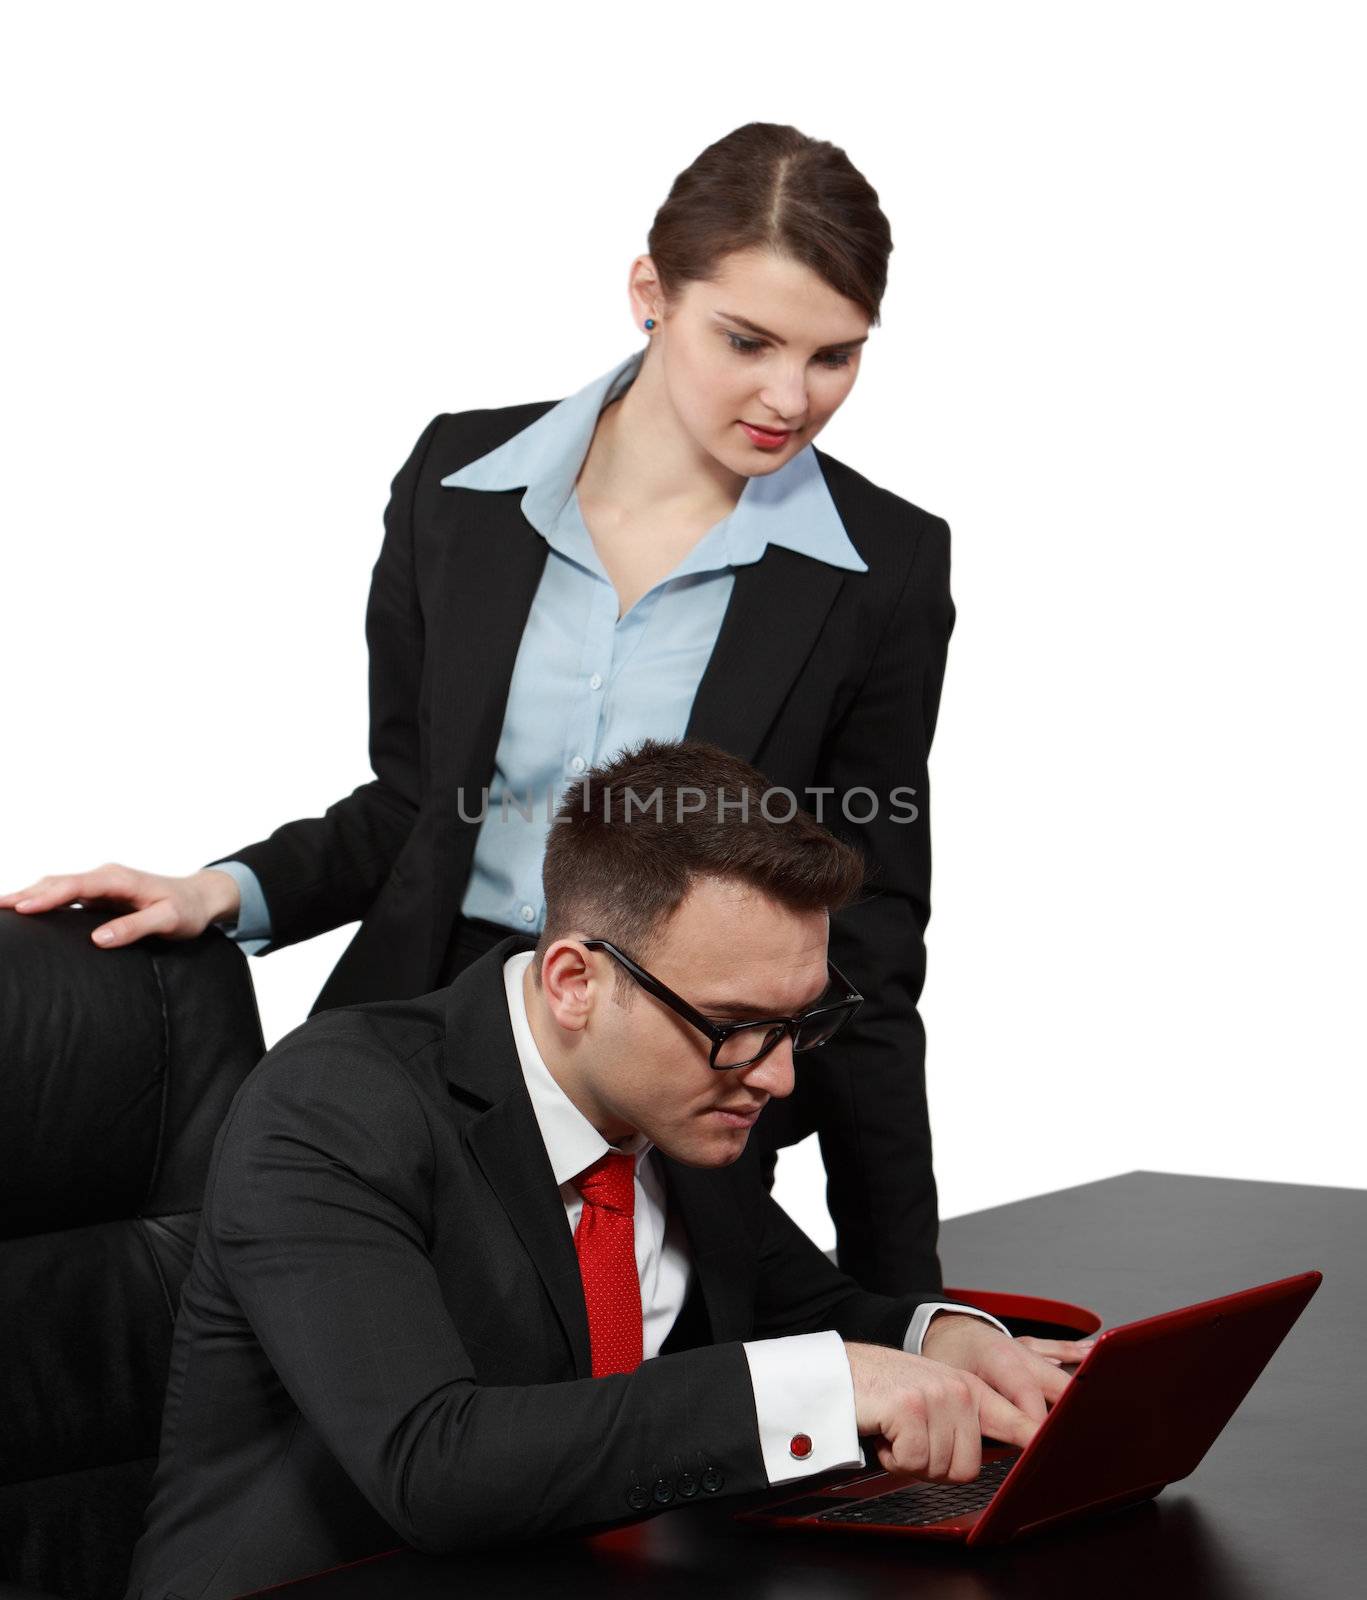 Young businesscouple looking together to a notebook, isolated against a white background. Selective focus on the man.